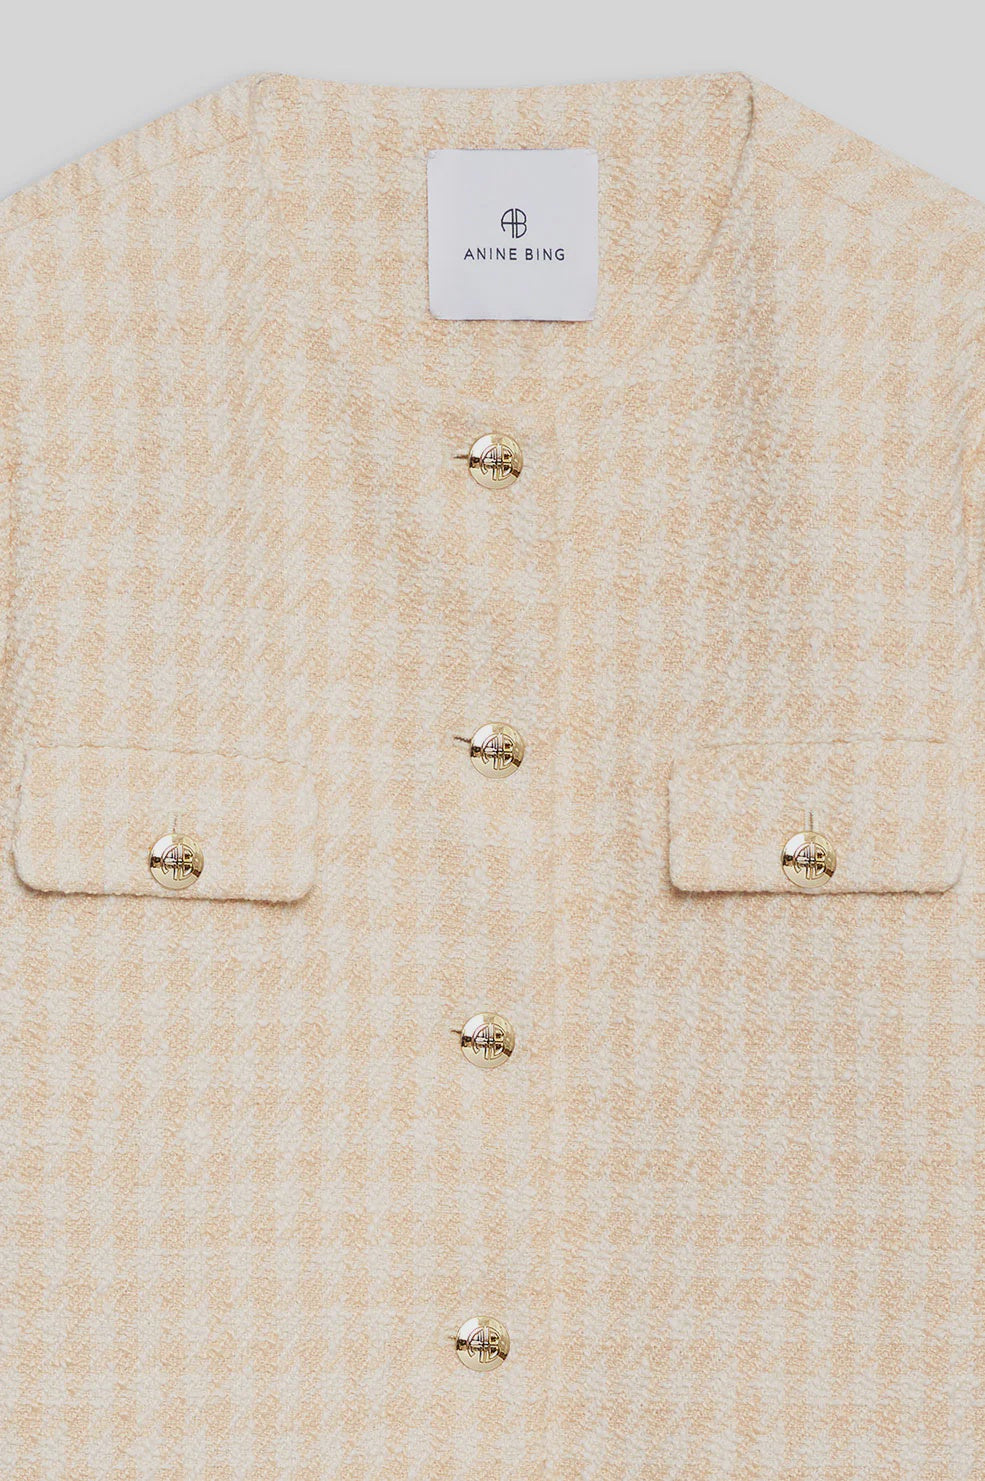 Janet Jacket Cream and Peach Houndstooth